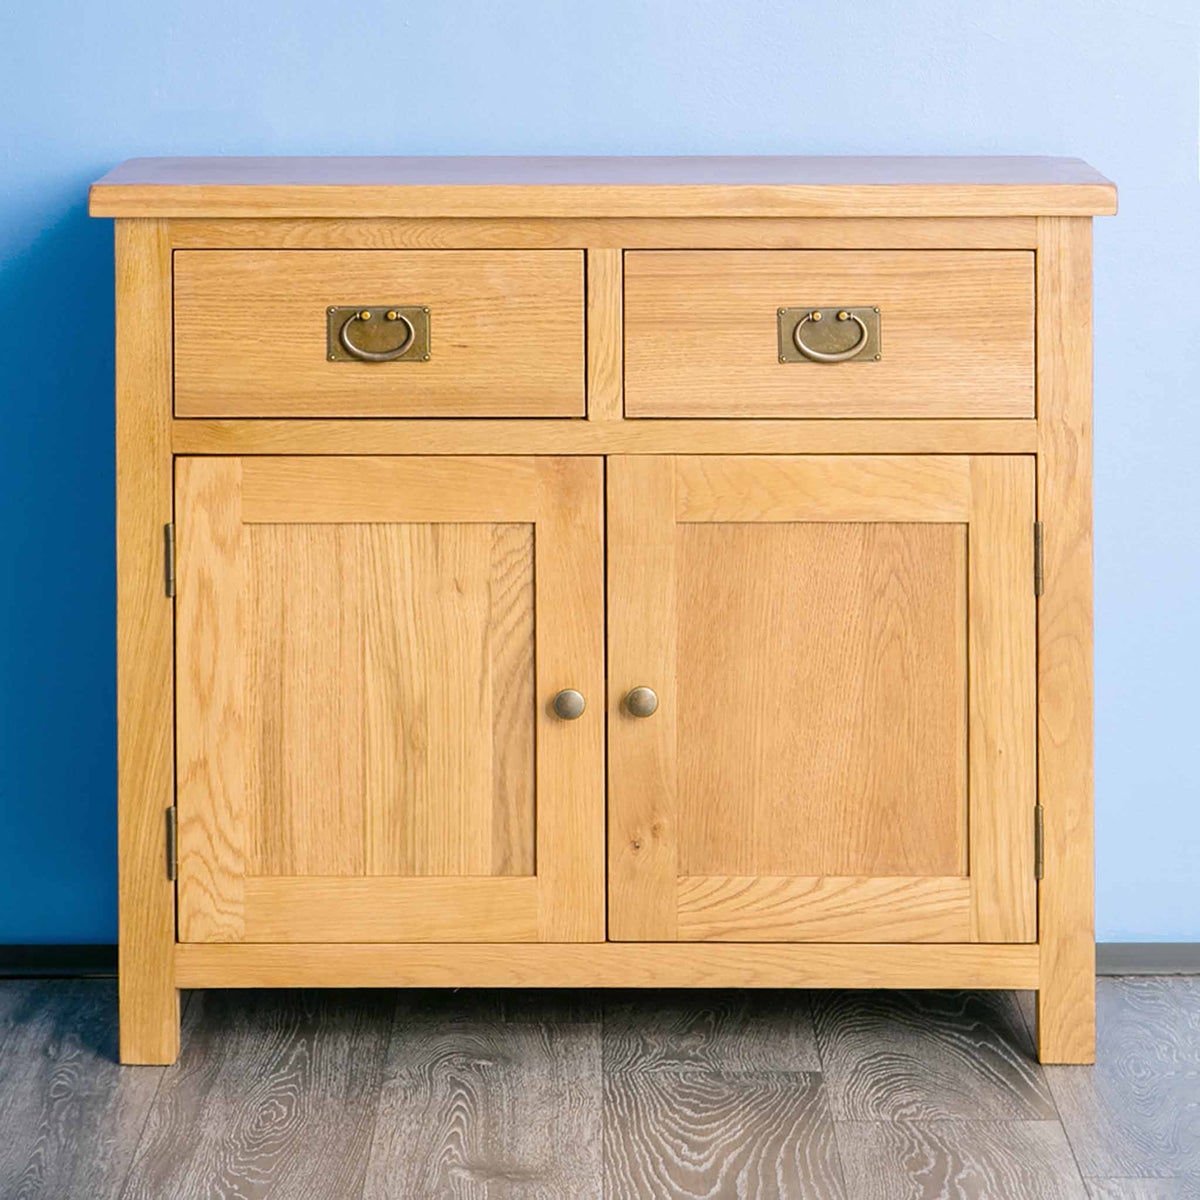 Surrey Oak Small Sideboard - Front view